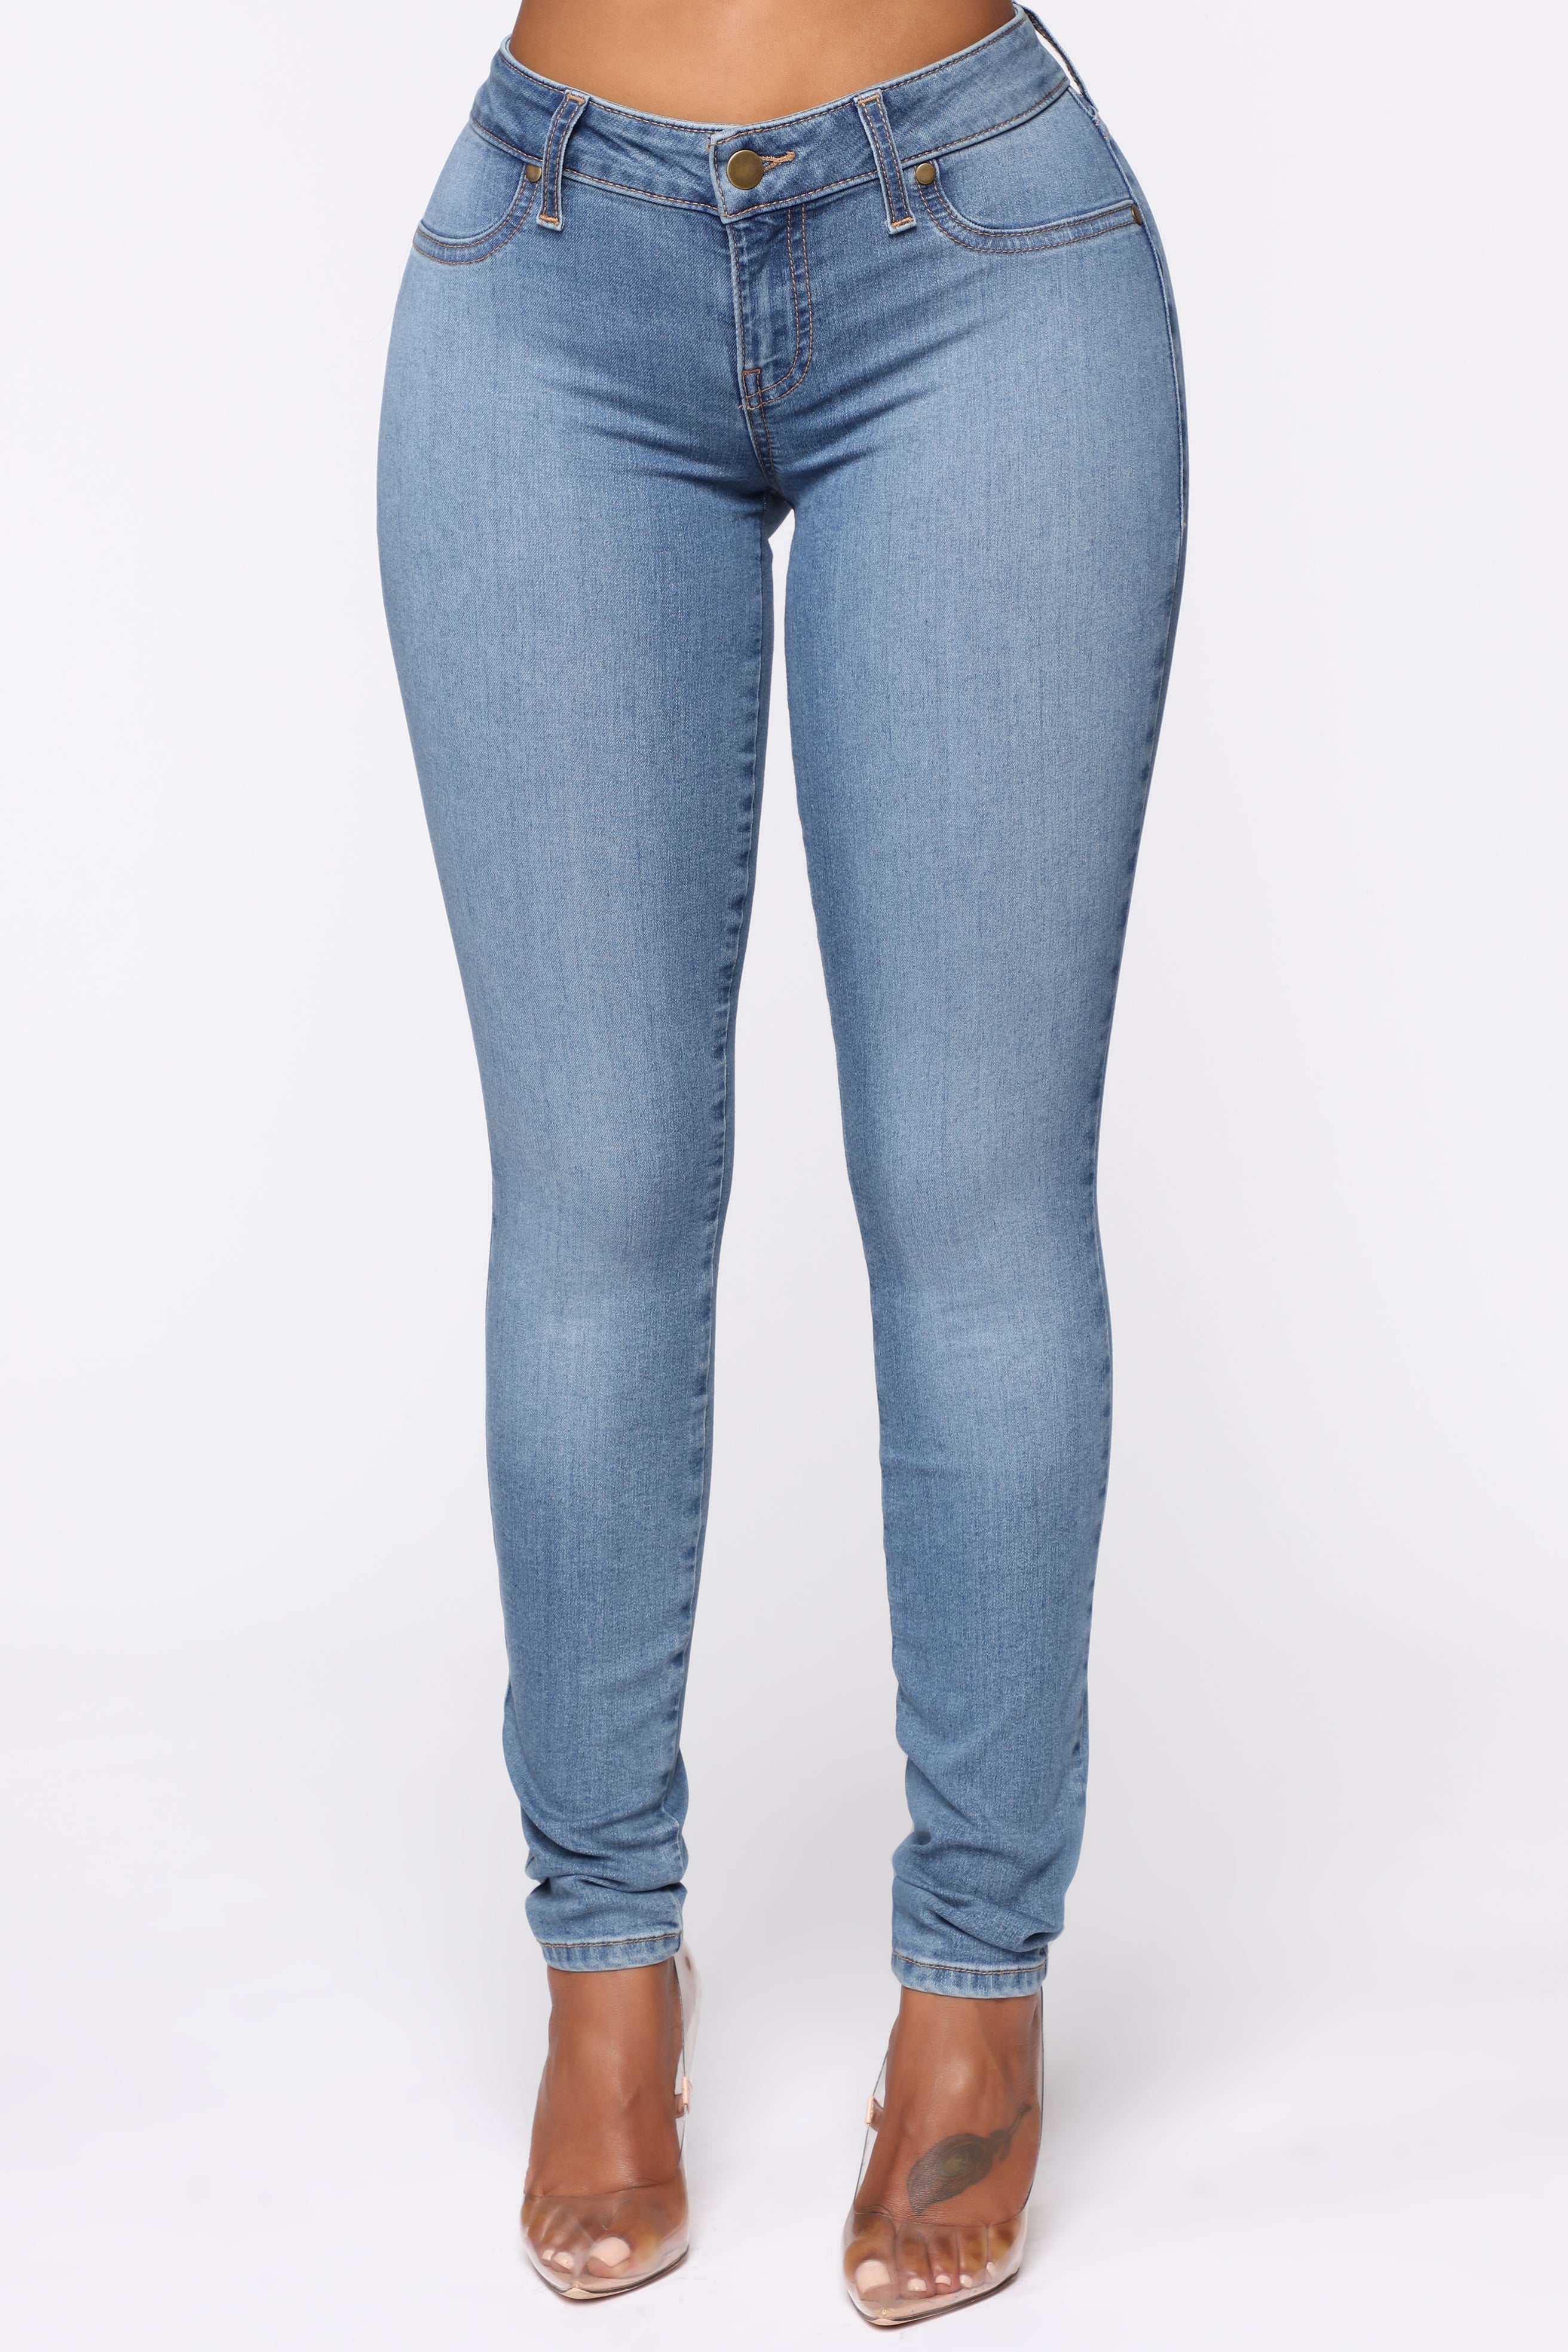 Flex Game Strong Low Rise Skinny Jeans - Light Blue Wash